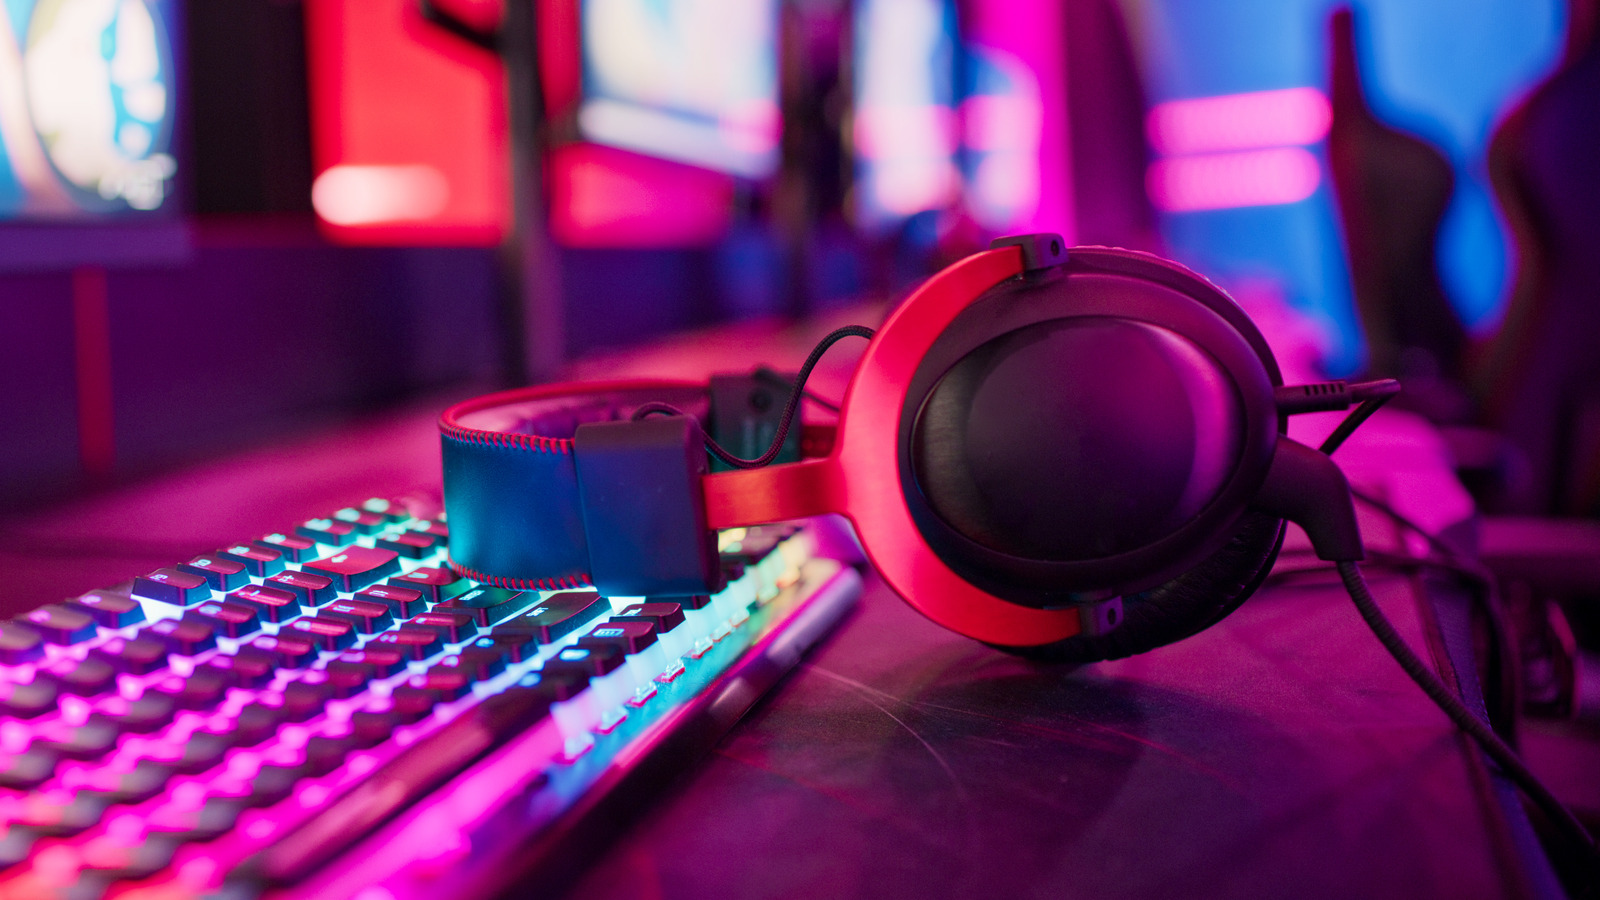 Major Gaming Headset Brands Ranked Worst To Best